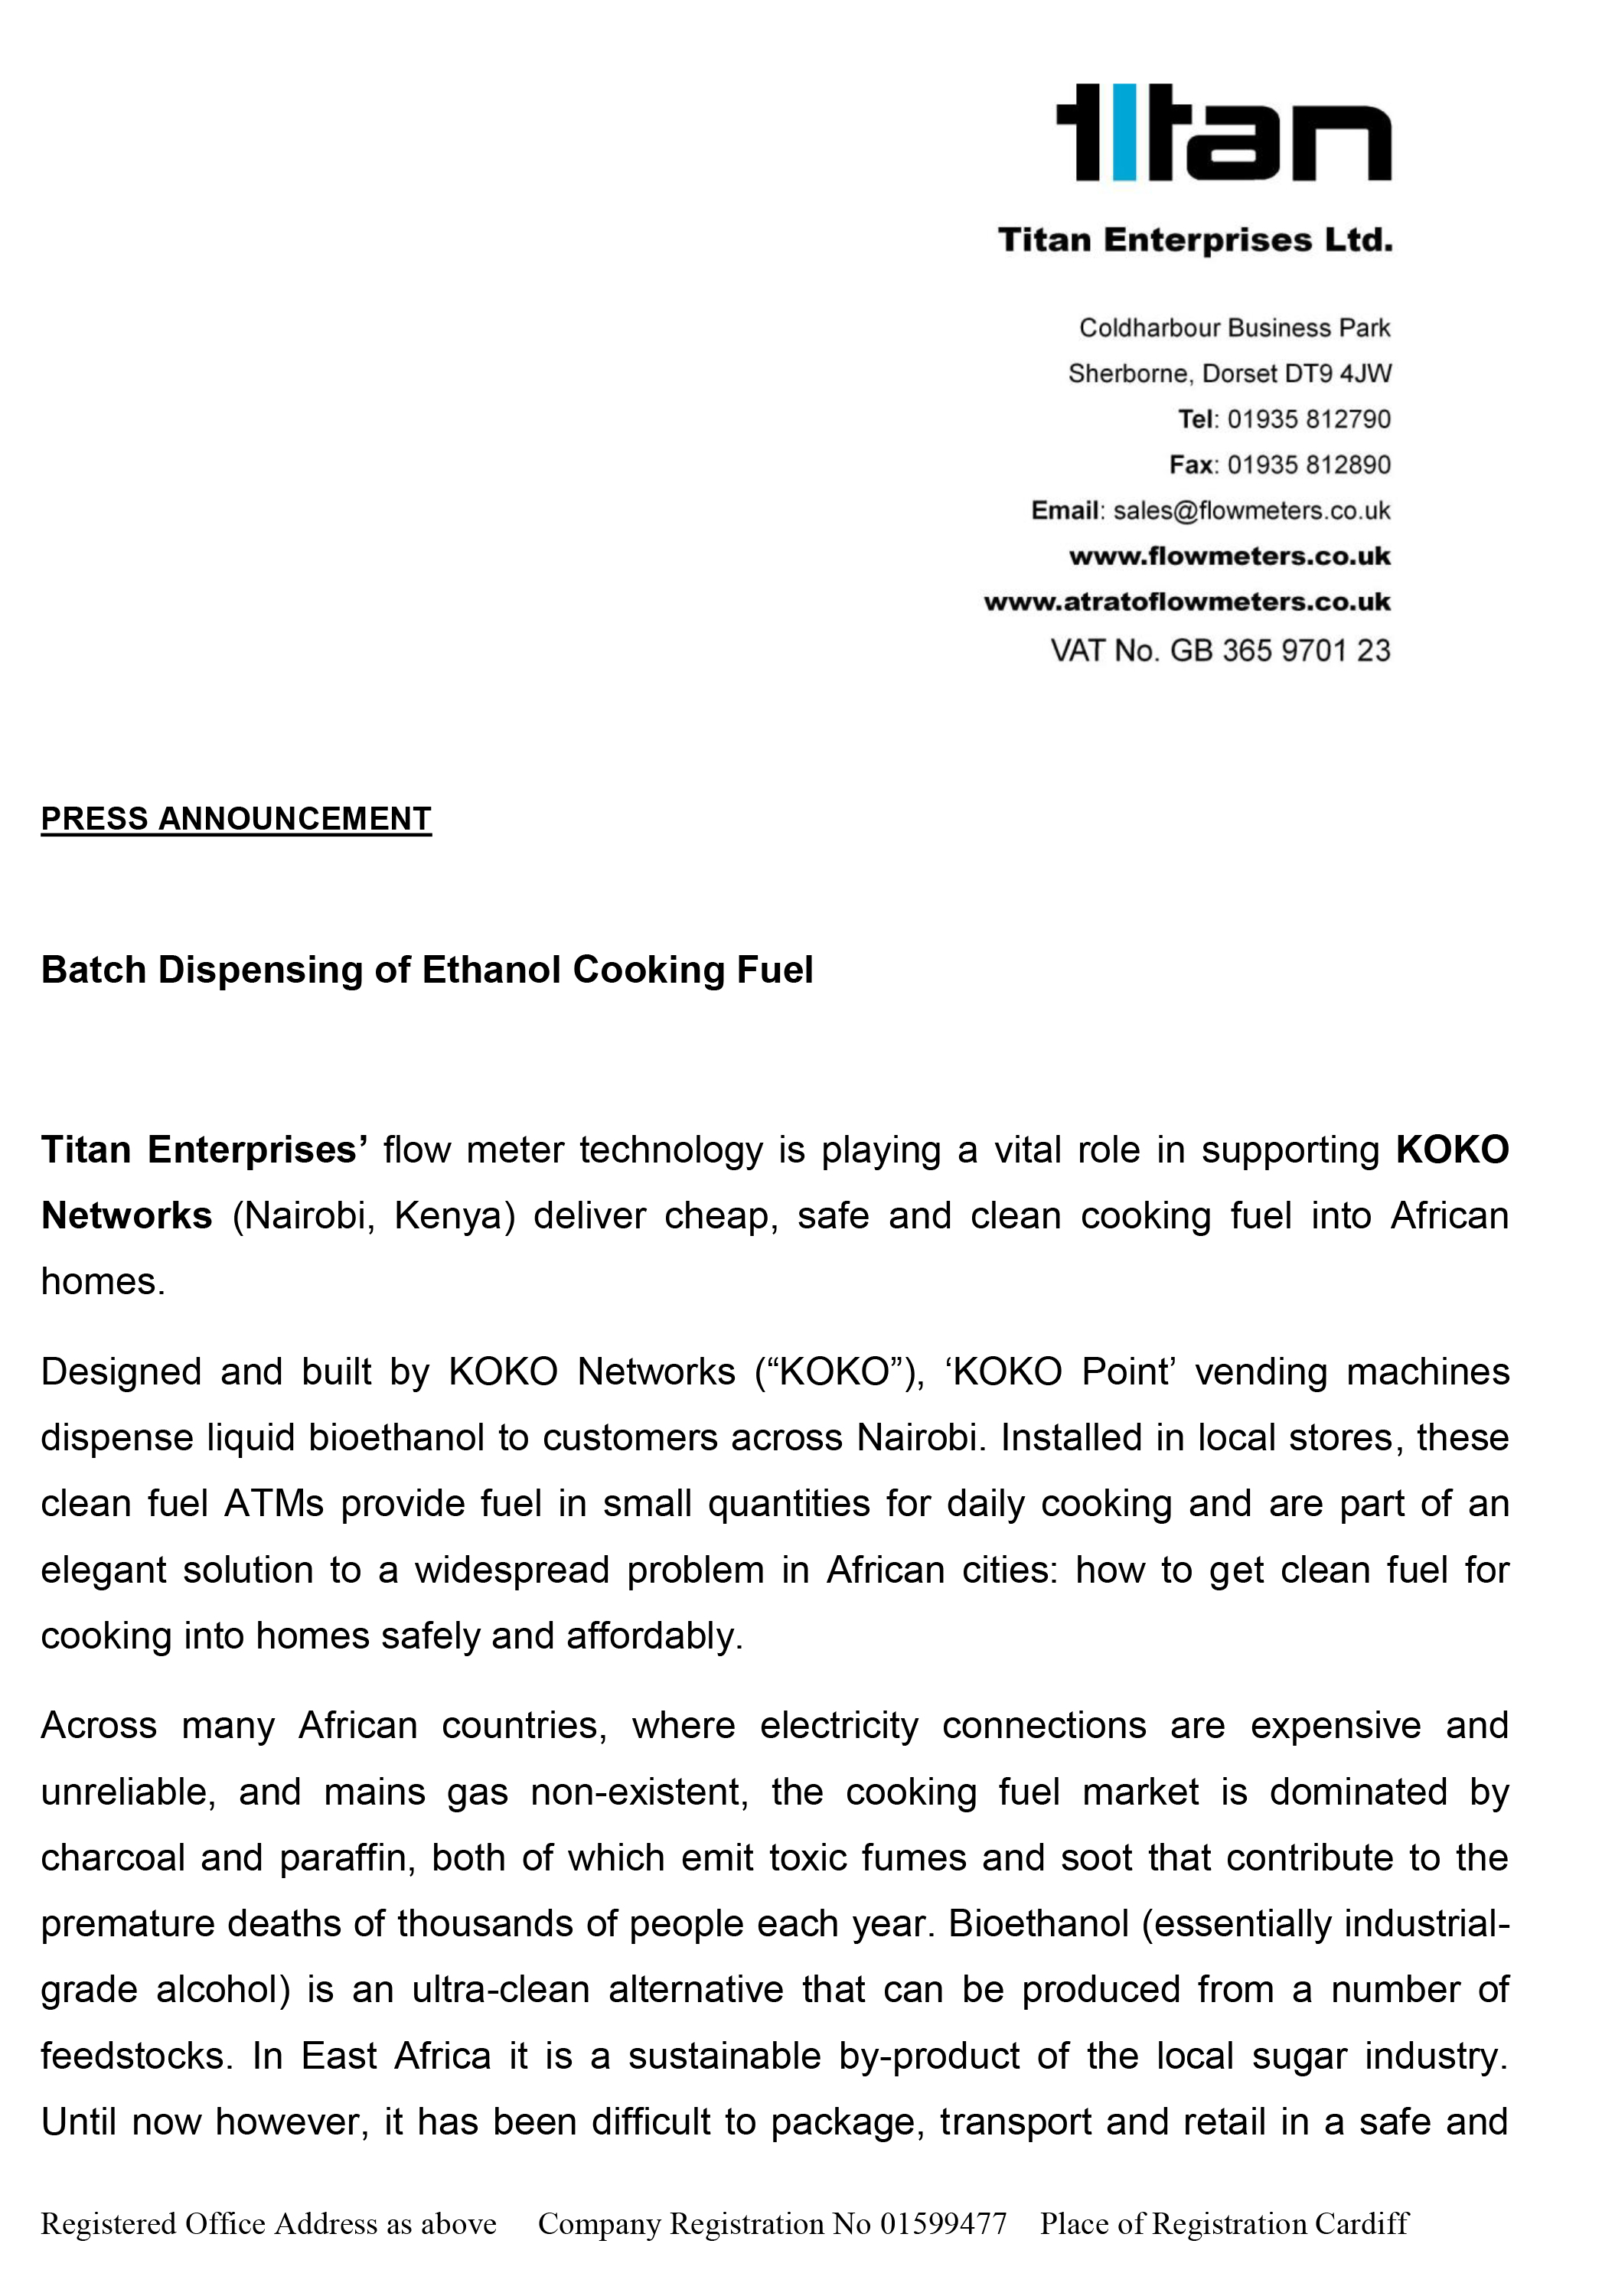 Batch Dispensing of Ethanol Cooking Fuel